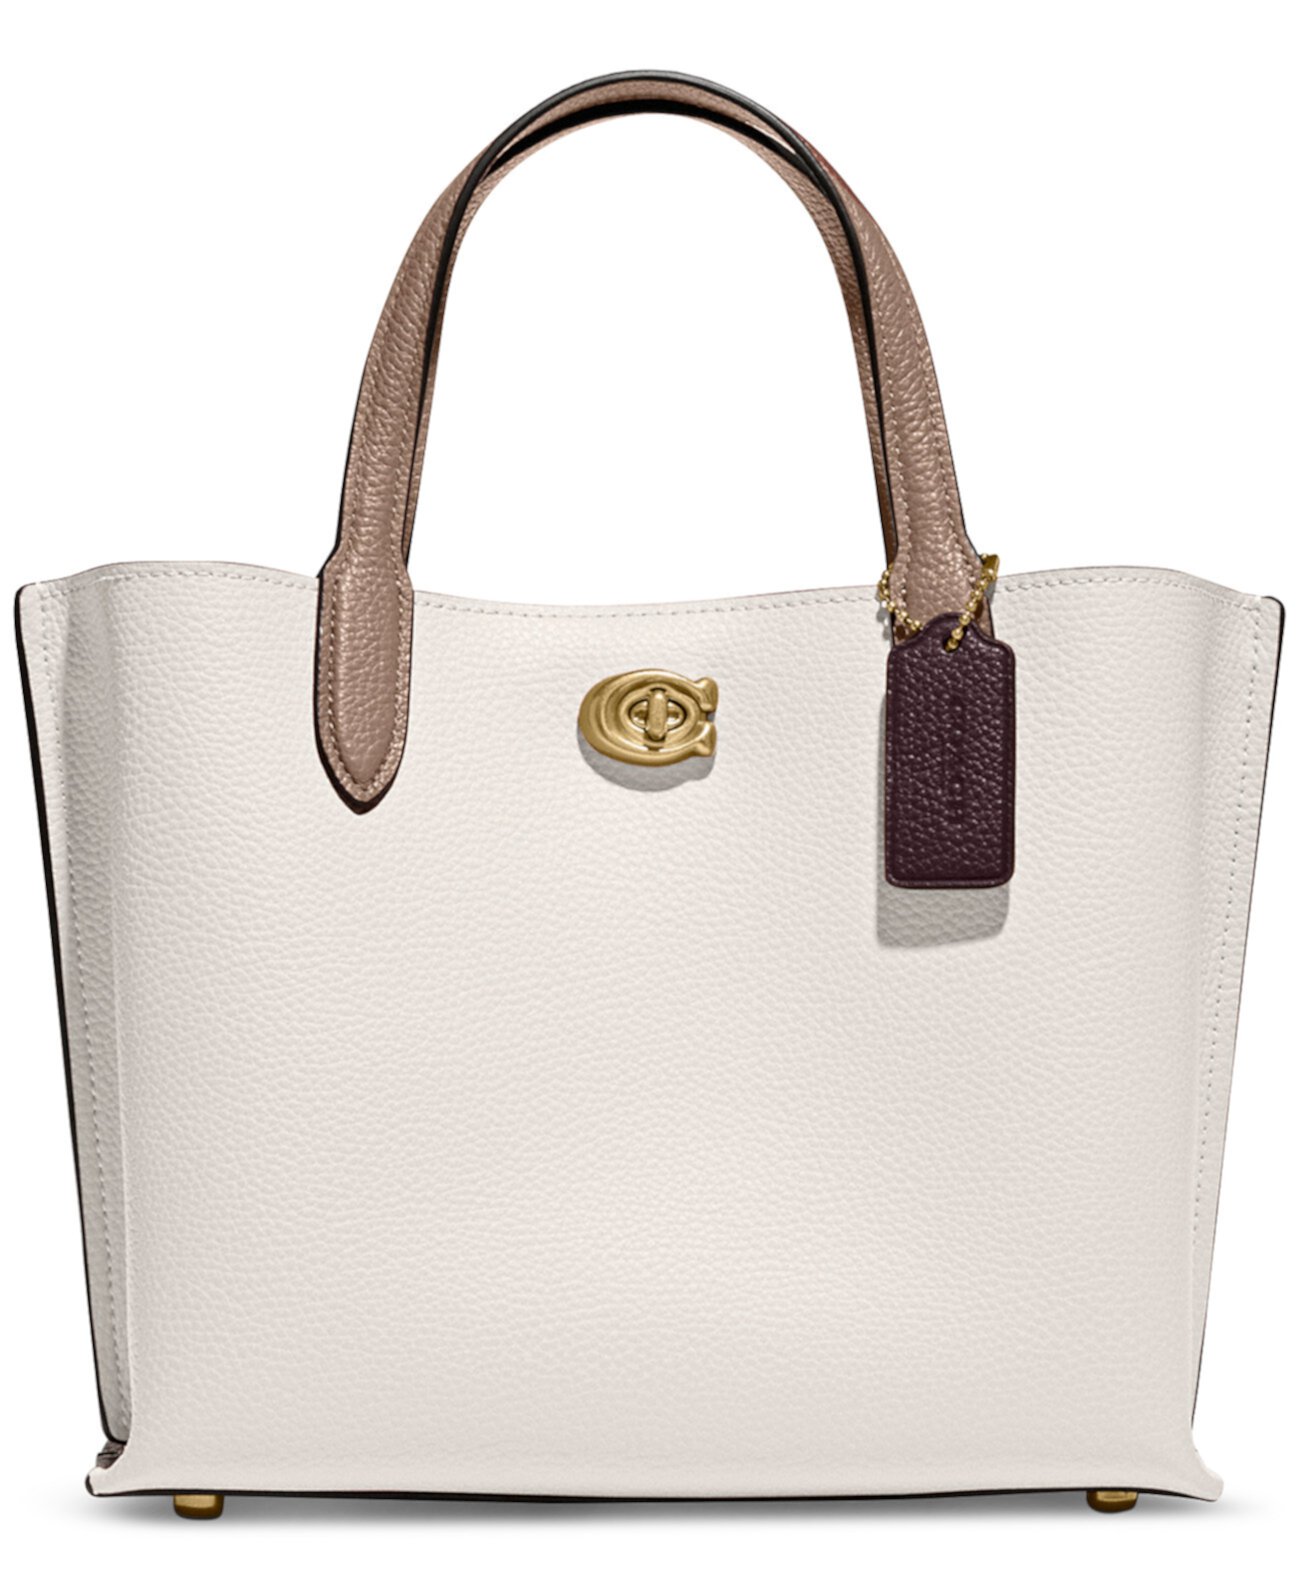 Polished Pebble Leather Willow Tote 24 with Convertible Straps COACH